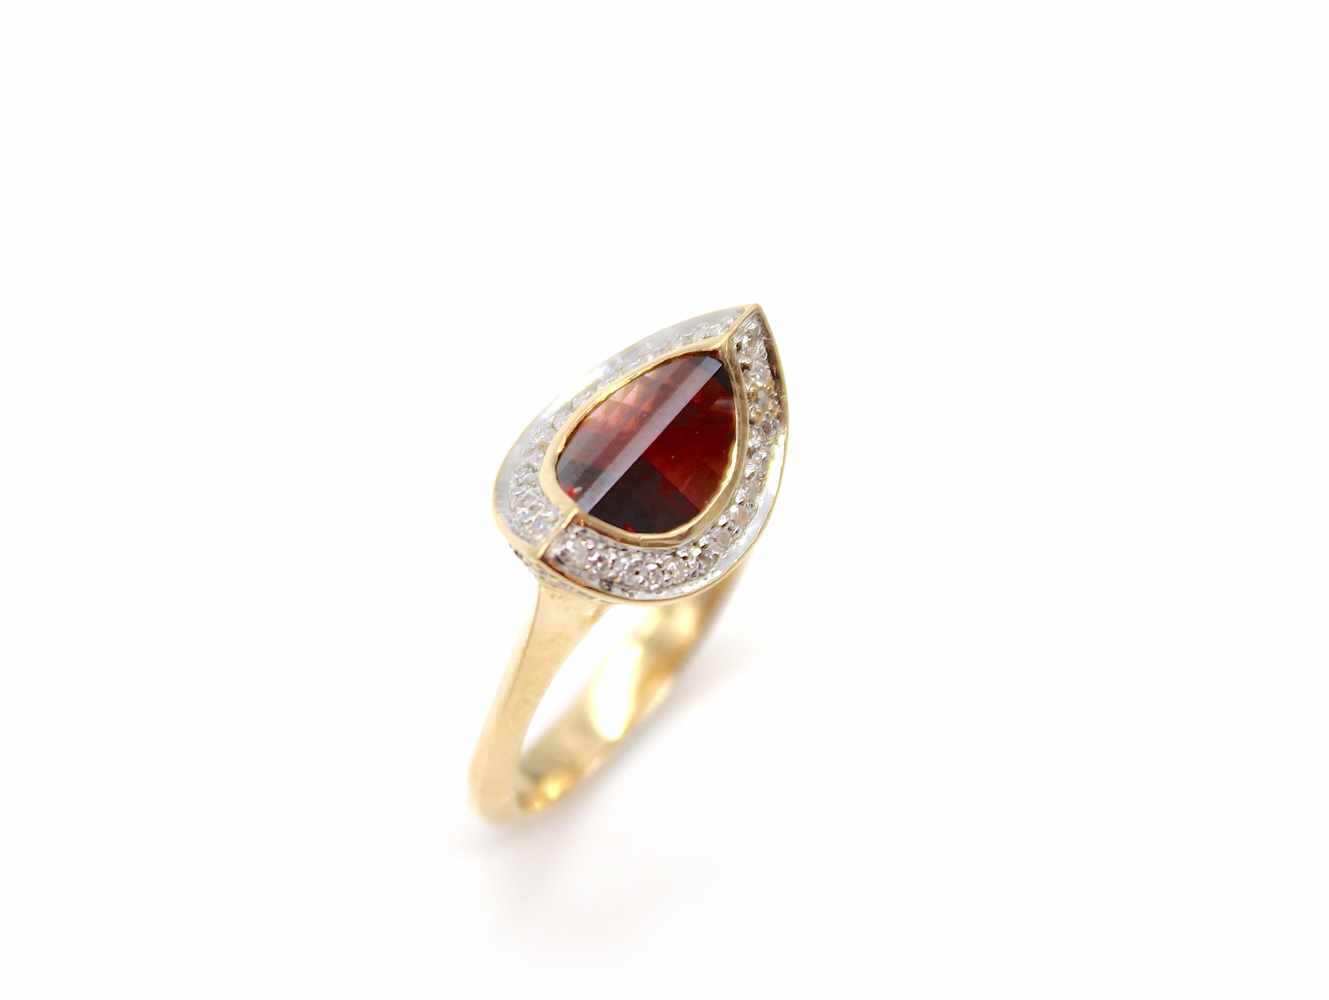 Ring made of 585 gold with a garnet and small diamonds.Weight 5 g, size 56- - -15.00 % buyer's - Image 4 of 4